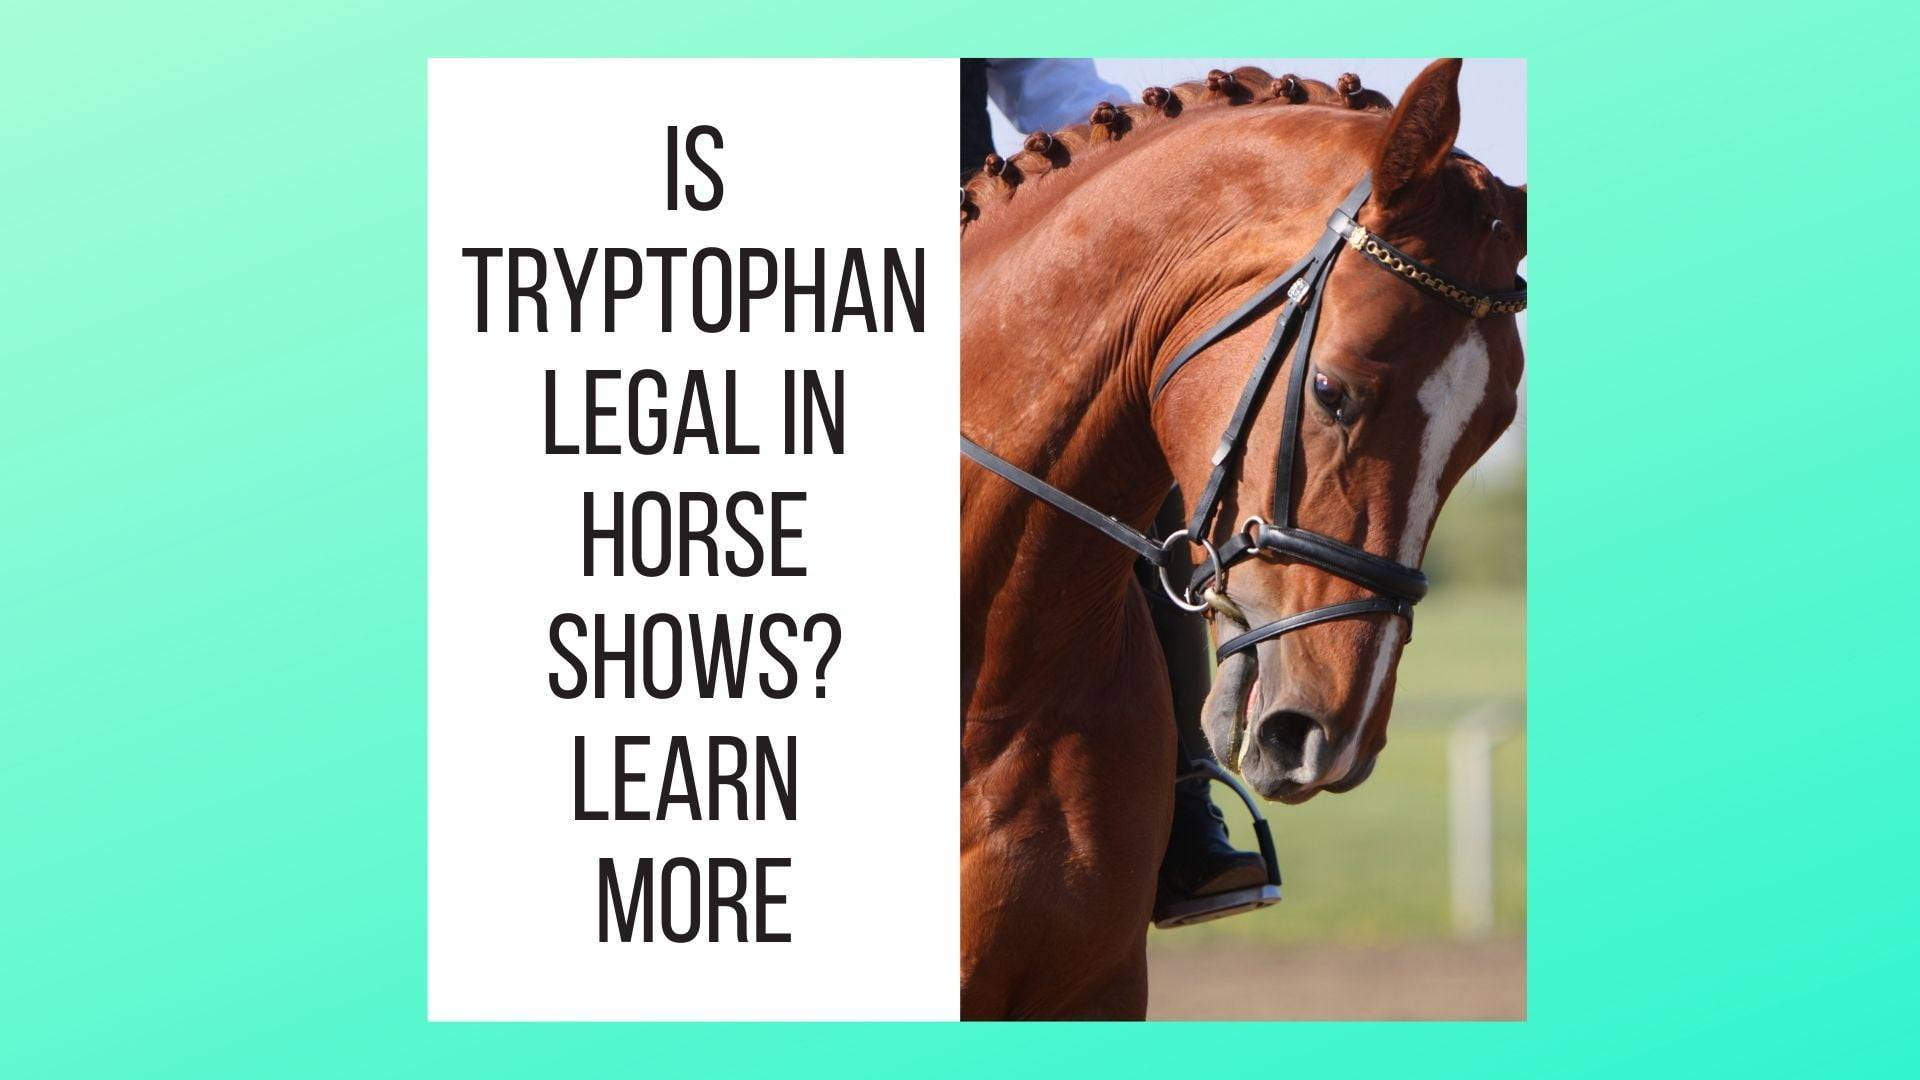 Is Tryptophan Legal in Horse Shows